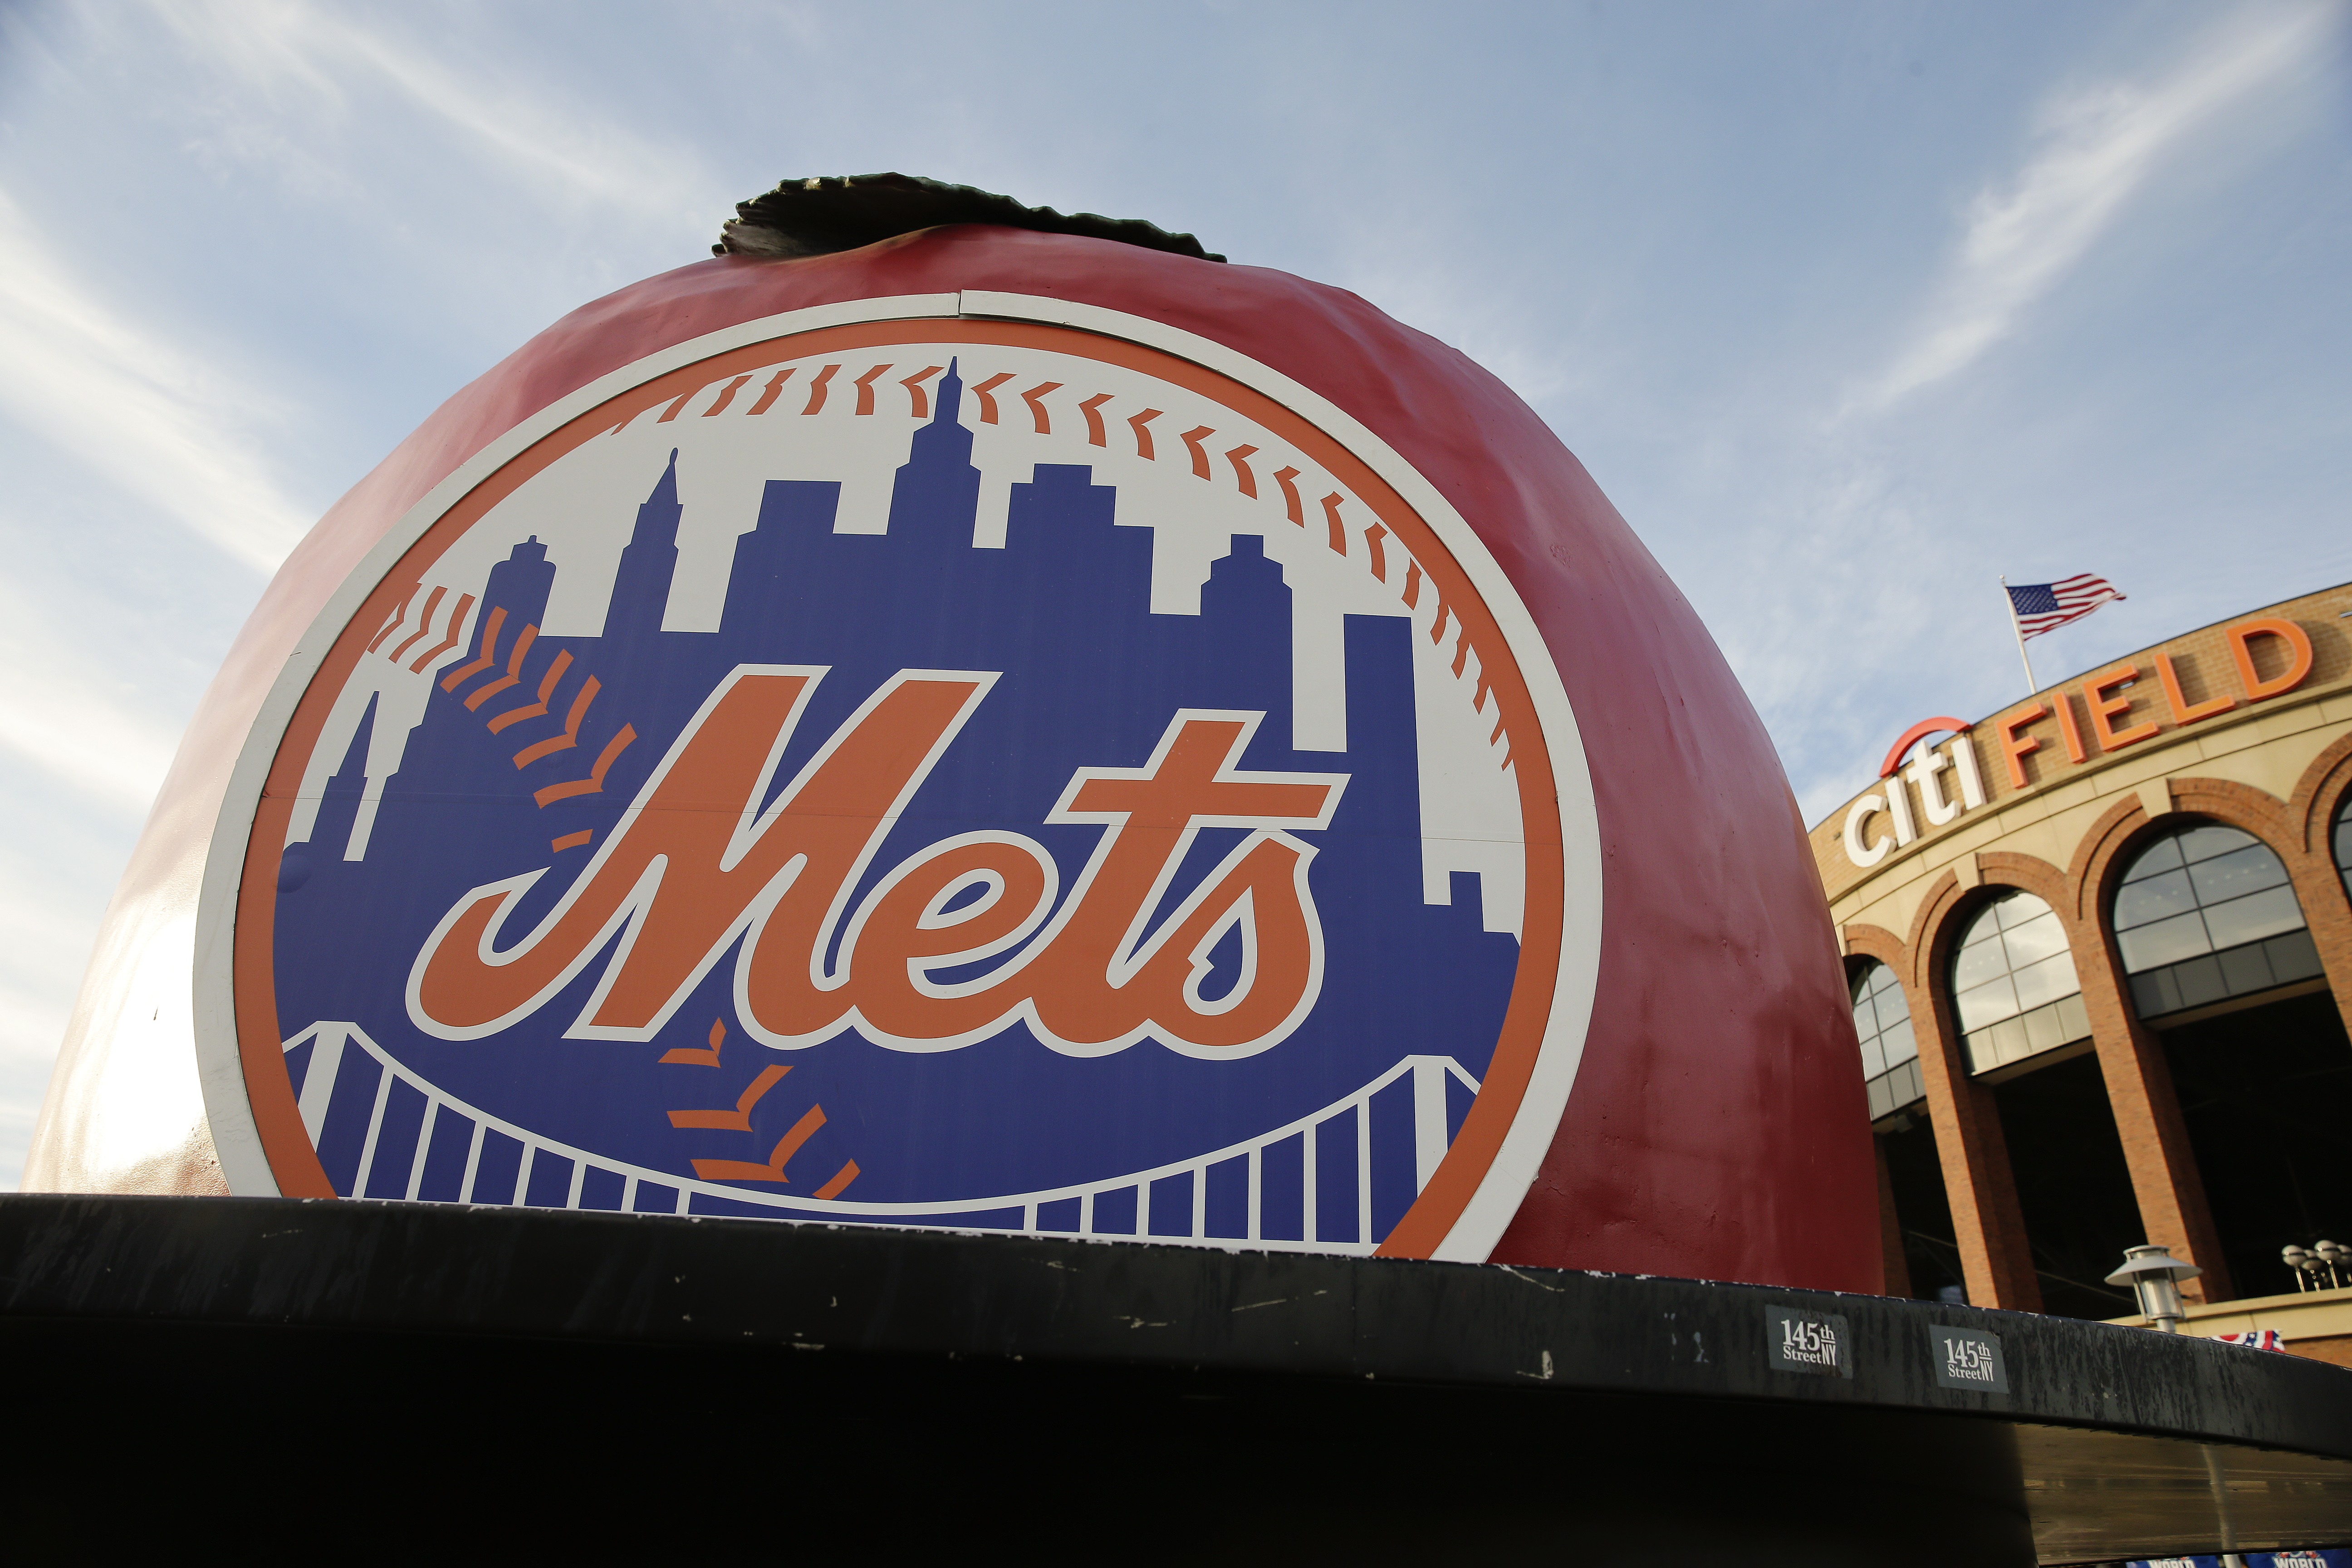 Mets news: Mets sign Gary Sánchez to a minor league deal - Amazin